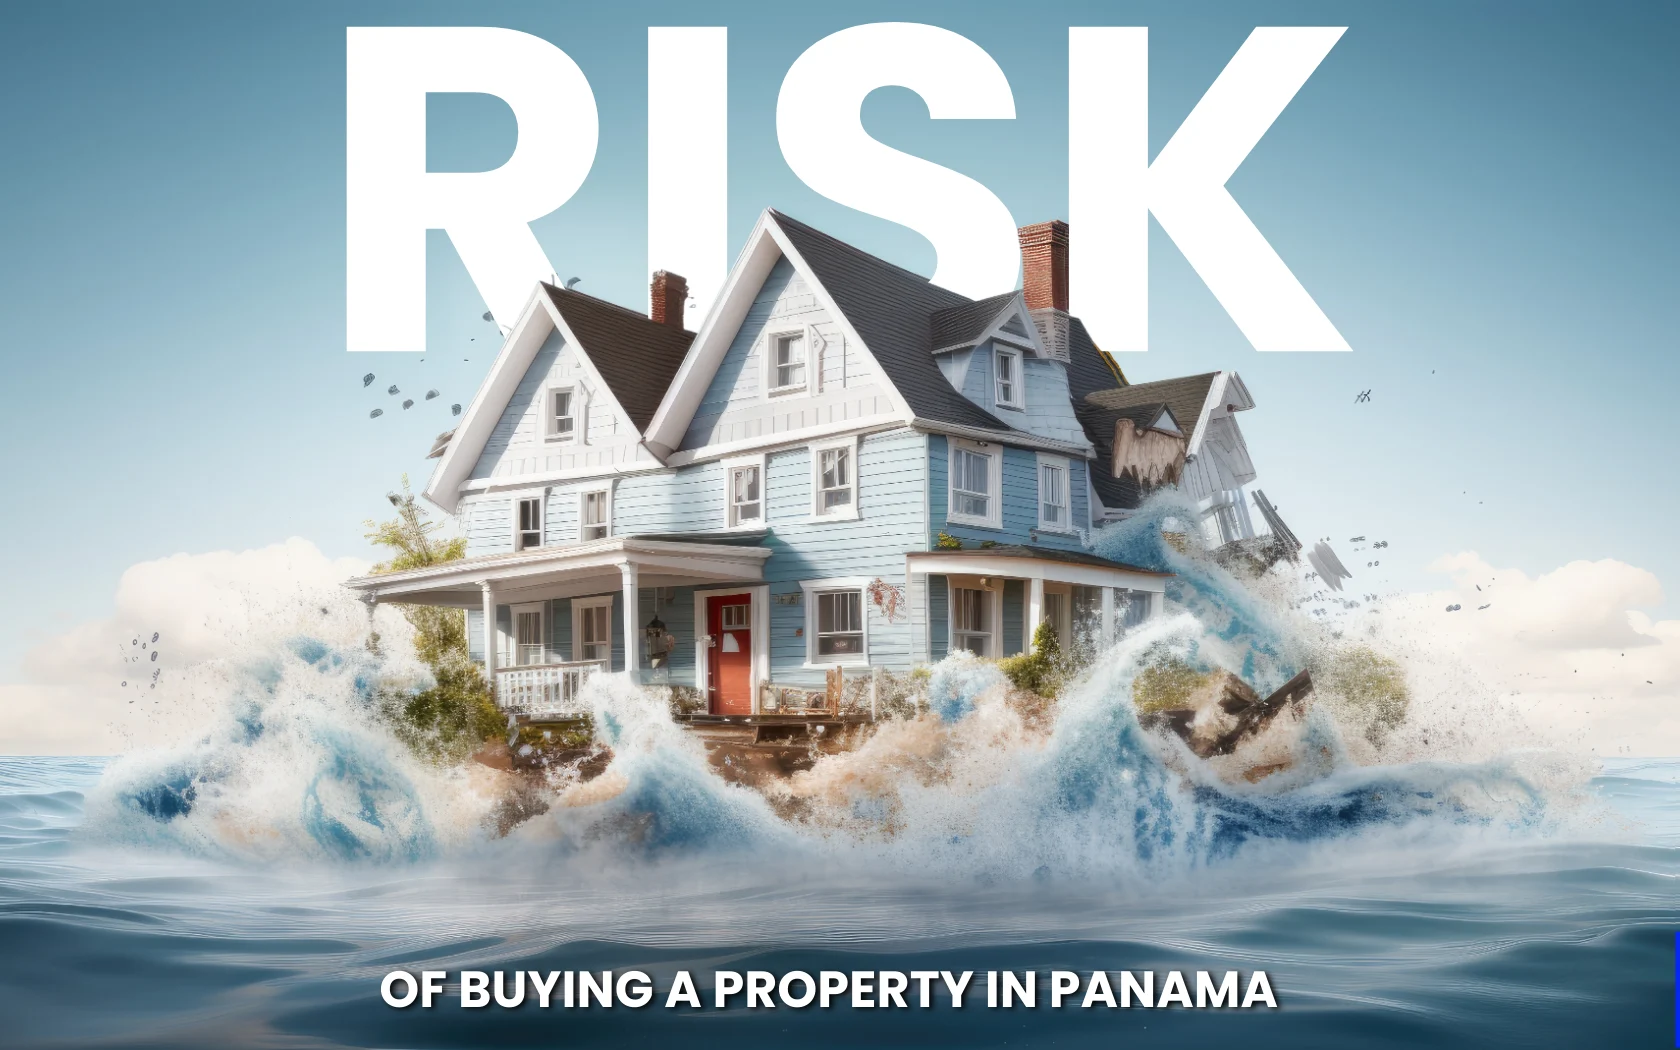 RISK OF BUYING A PROPERTY IN PANAMA